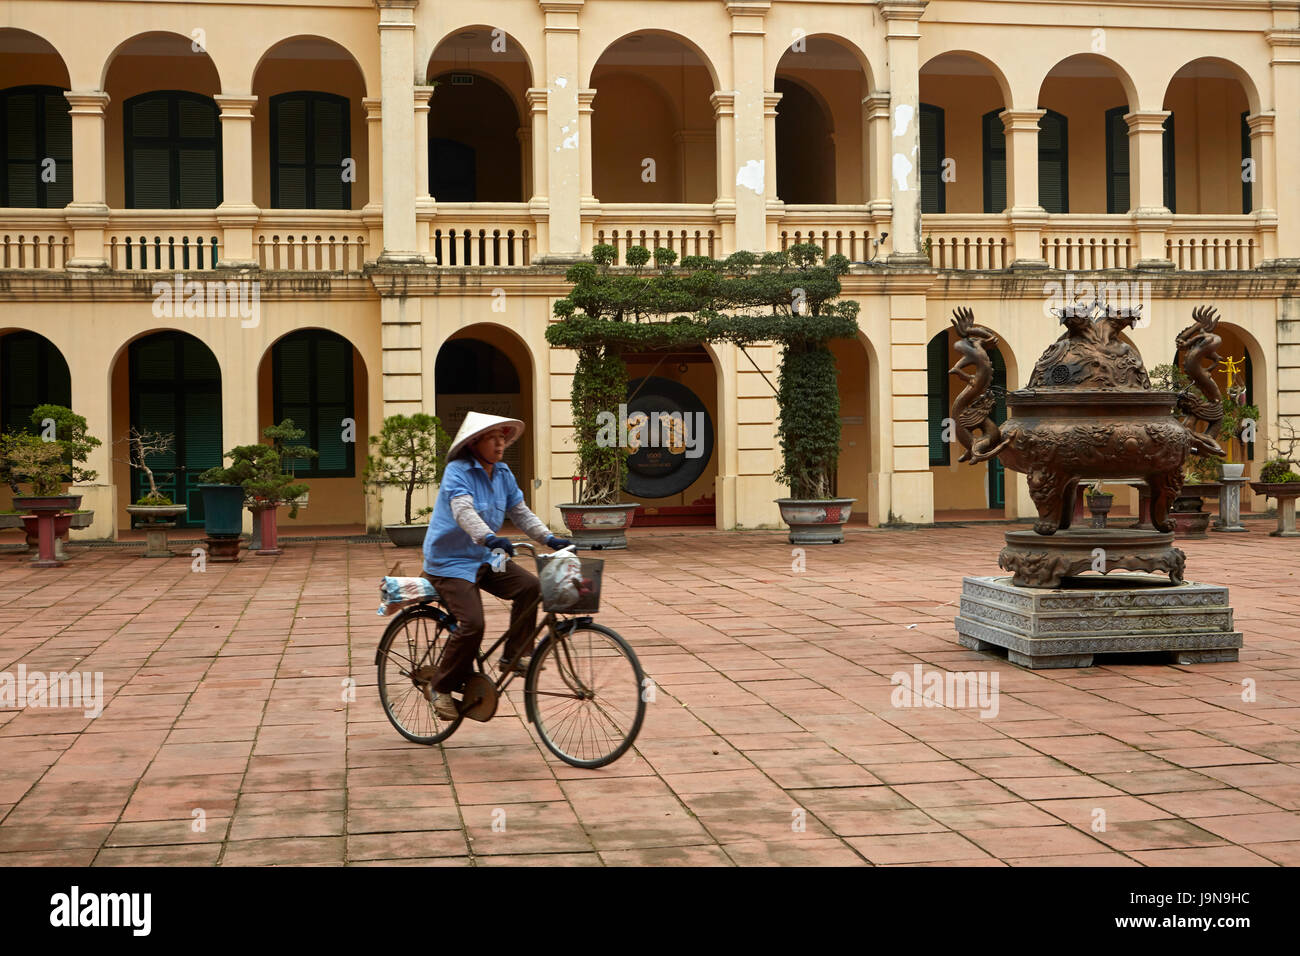 Cyclist and Imperial Citadel of Thang Long (UNESCO World Heritage Site), Hanoi, Vietnam Stock Photo